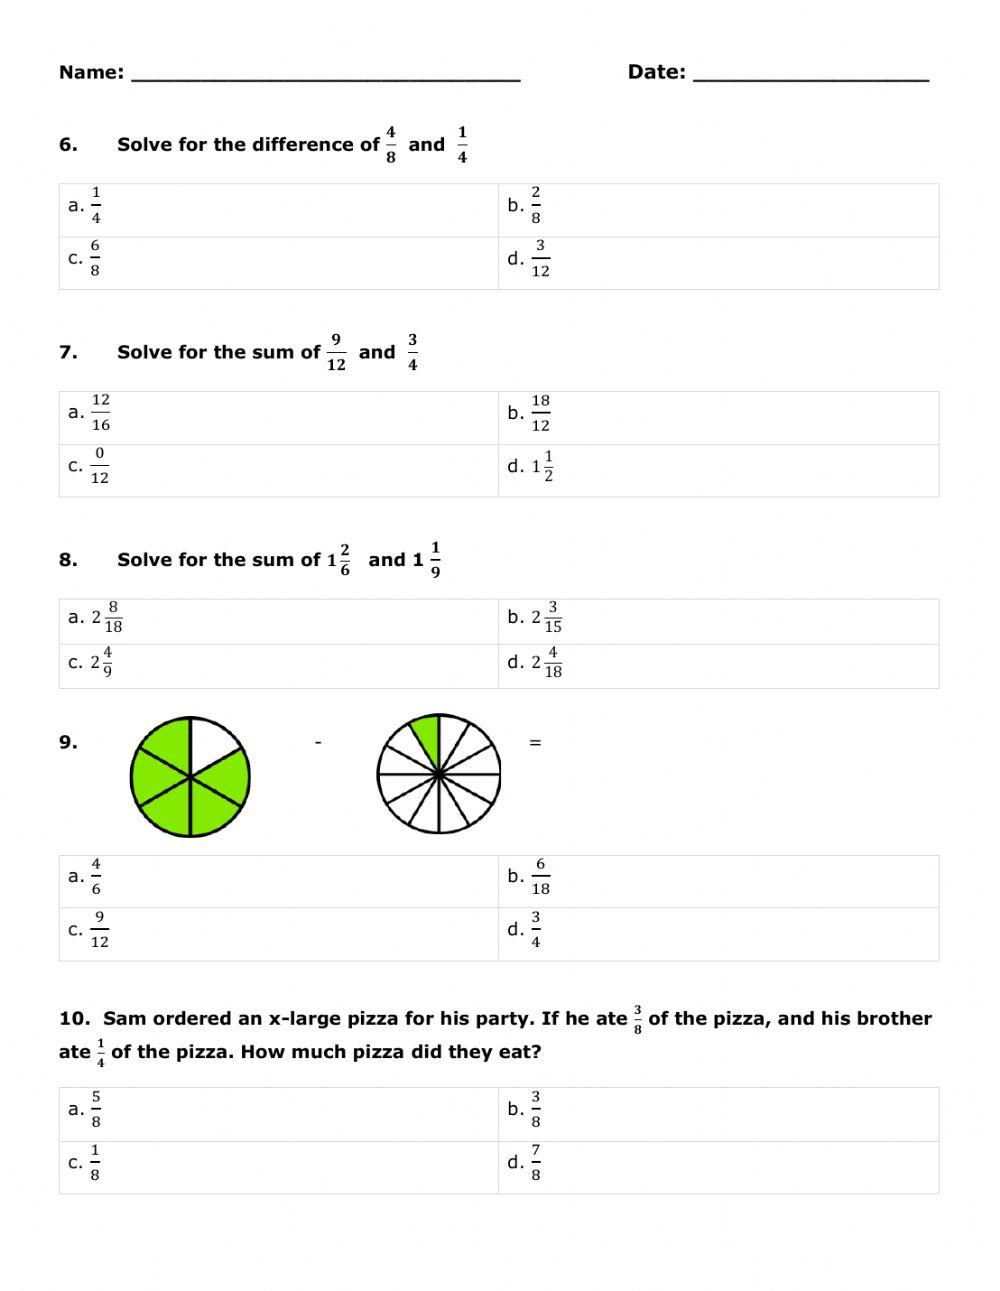 Add and Subtract Fractions and Mixed Numbers Assessment